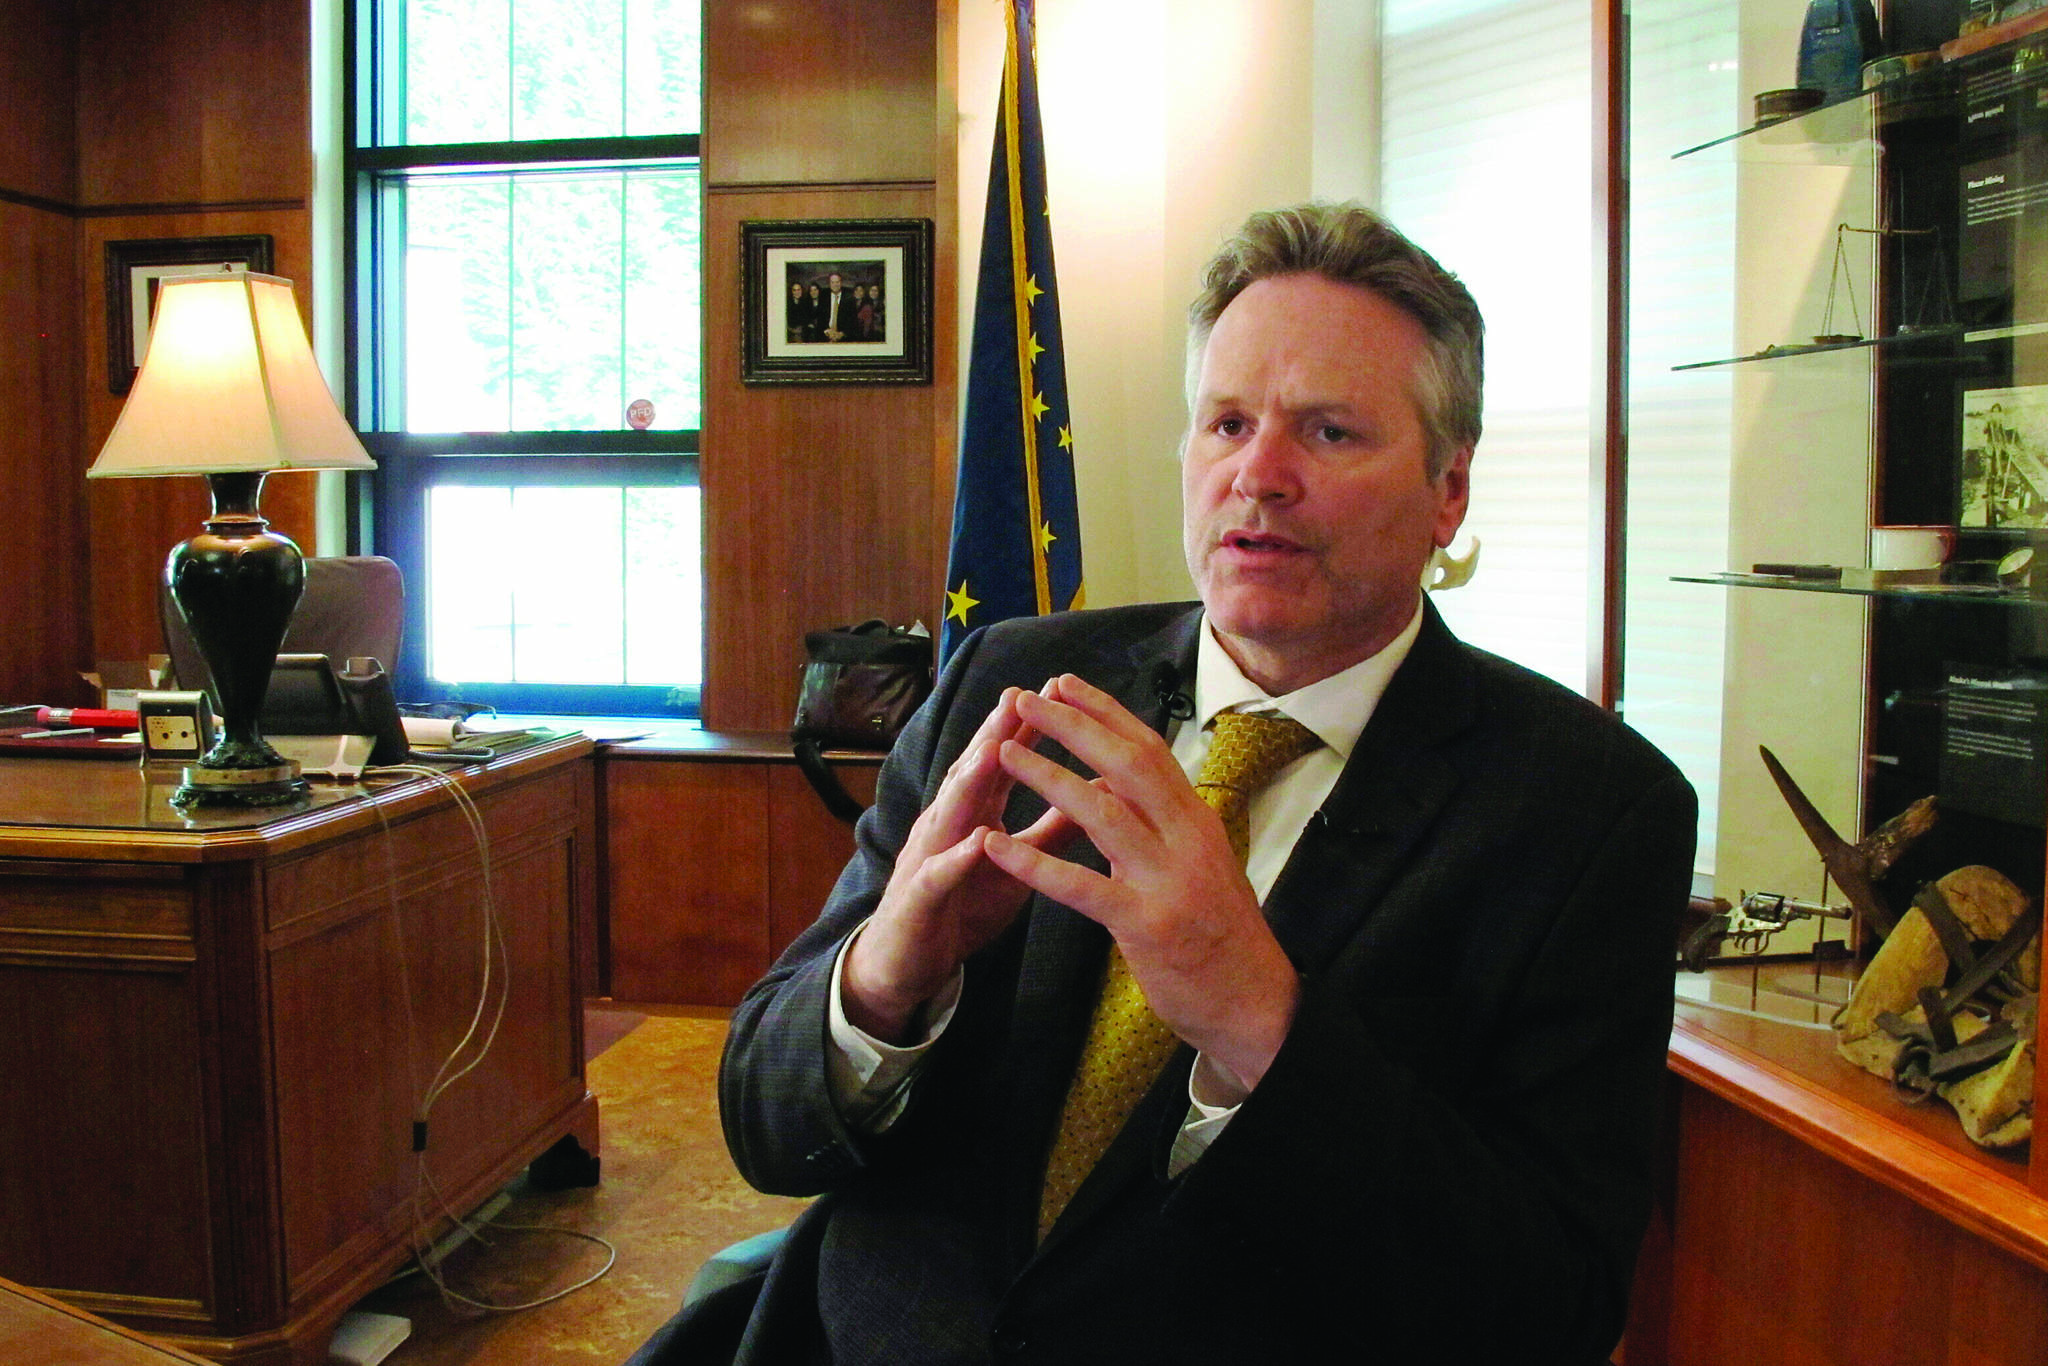 In this May 29, 2019 file photo, Alaska Gov. Mike Dunleavy speaks to reporters in his office at the state Capitol in Juneau, Alaska. (AP Photo/Becky Bohrer, File)